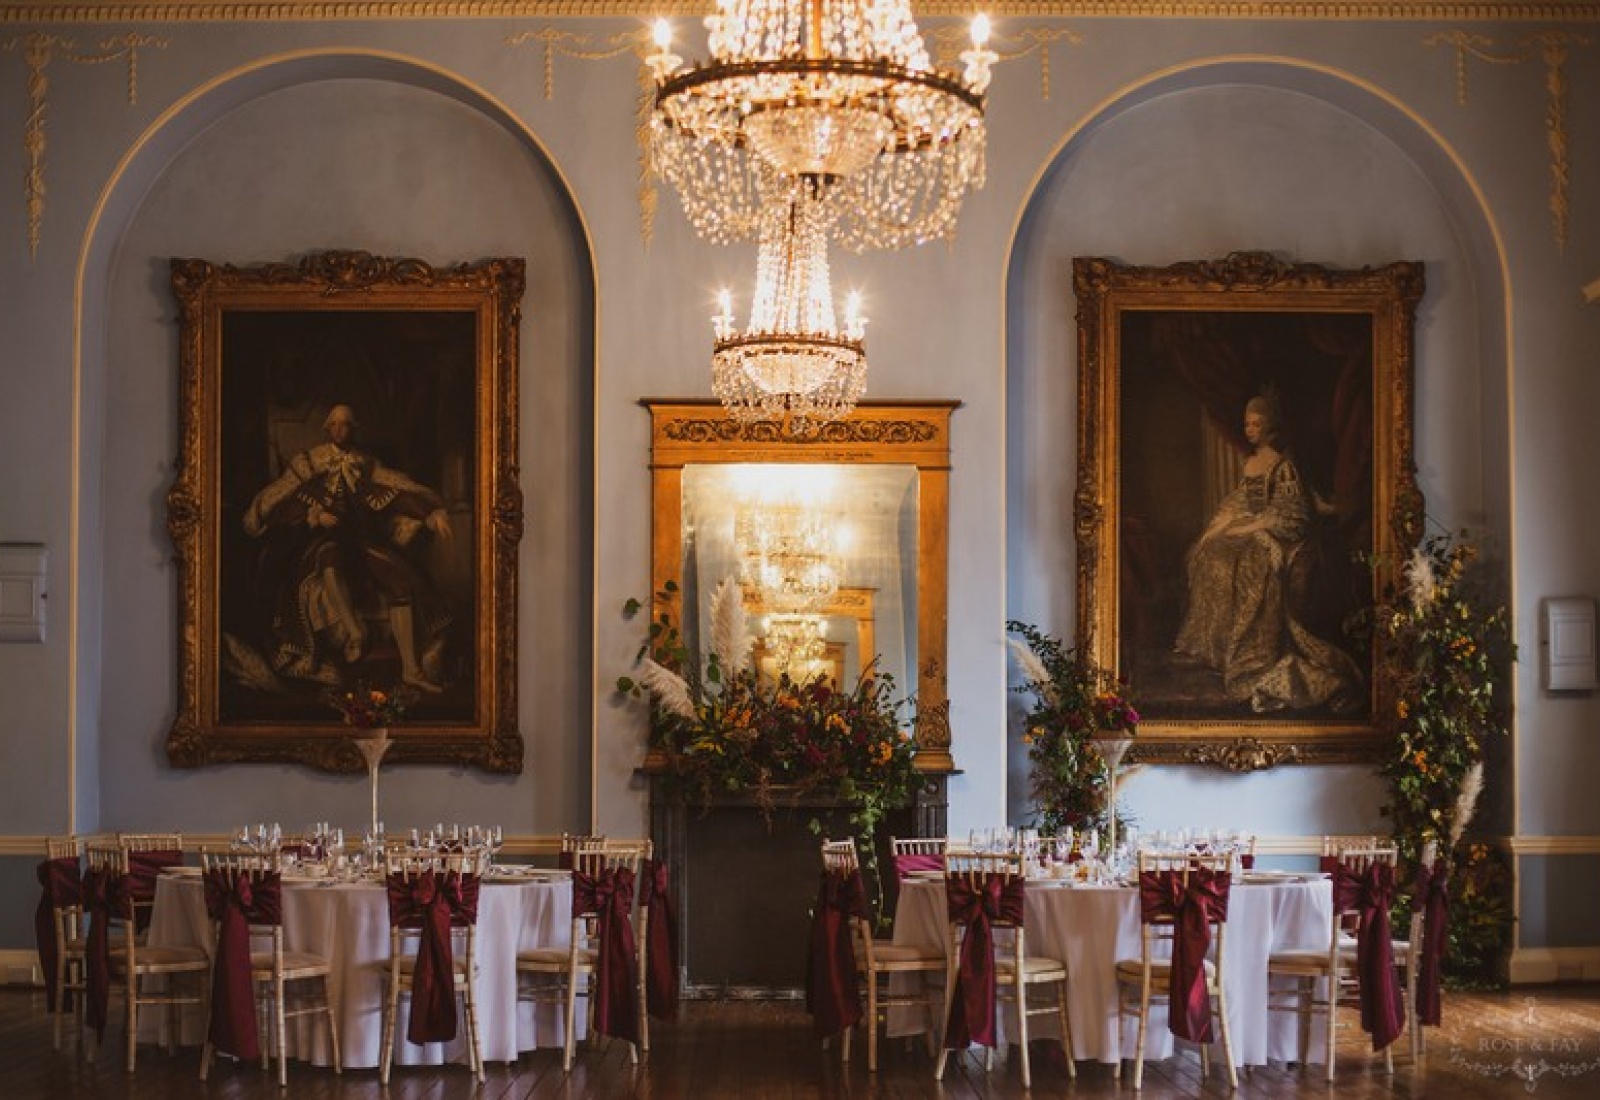 Whitewed Directory dilemma blog What to consider when choosing your wedding venue setting price food bar location cost Devizes Town Hall Wiltshire Rose and Fay Photography elegant historic setting